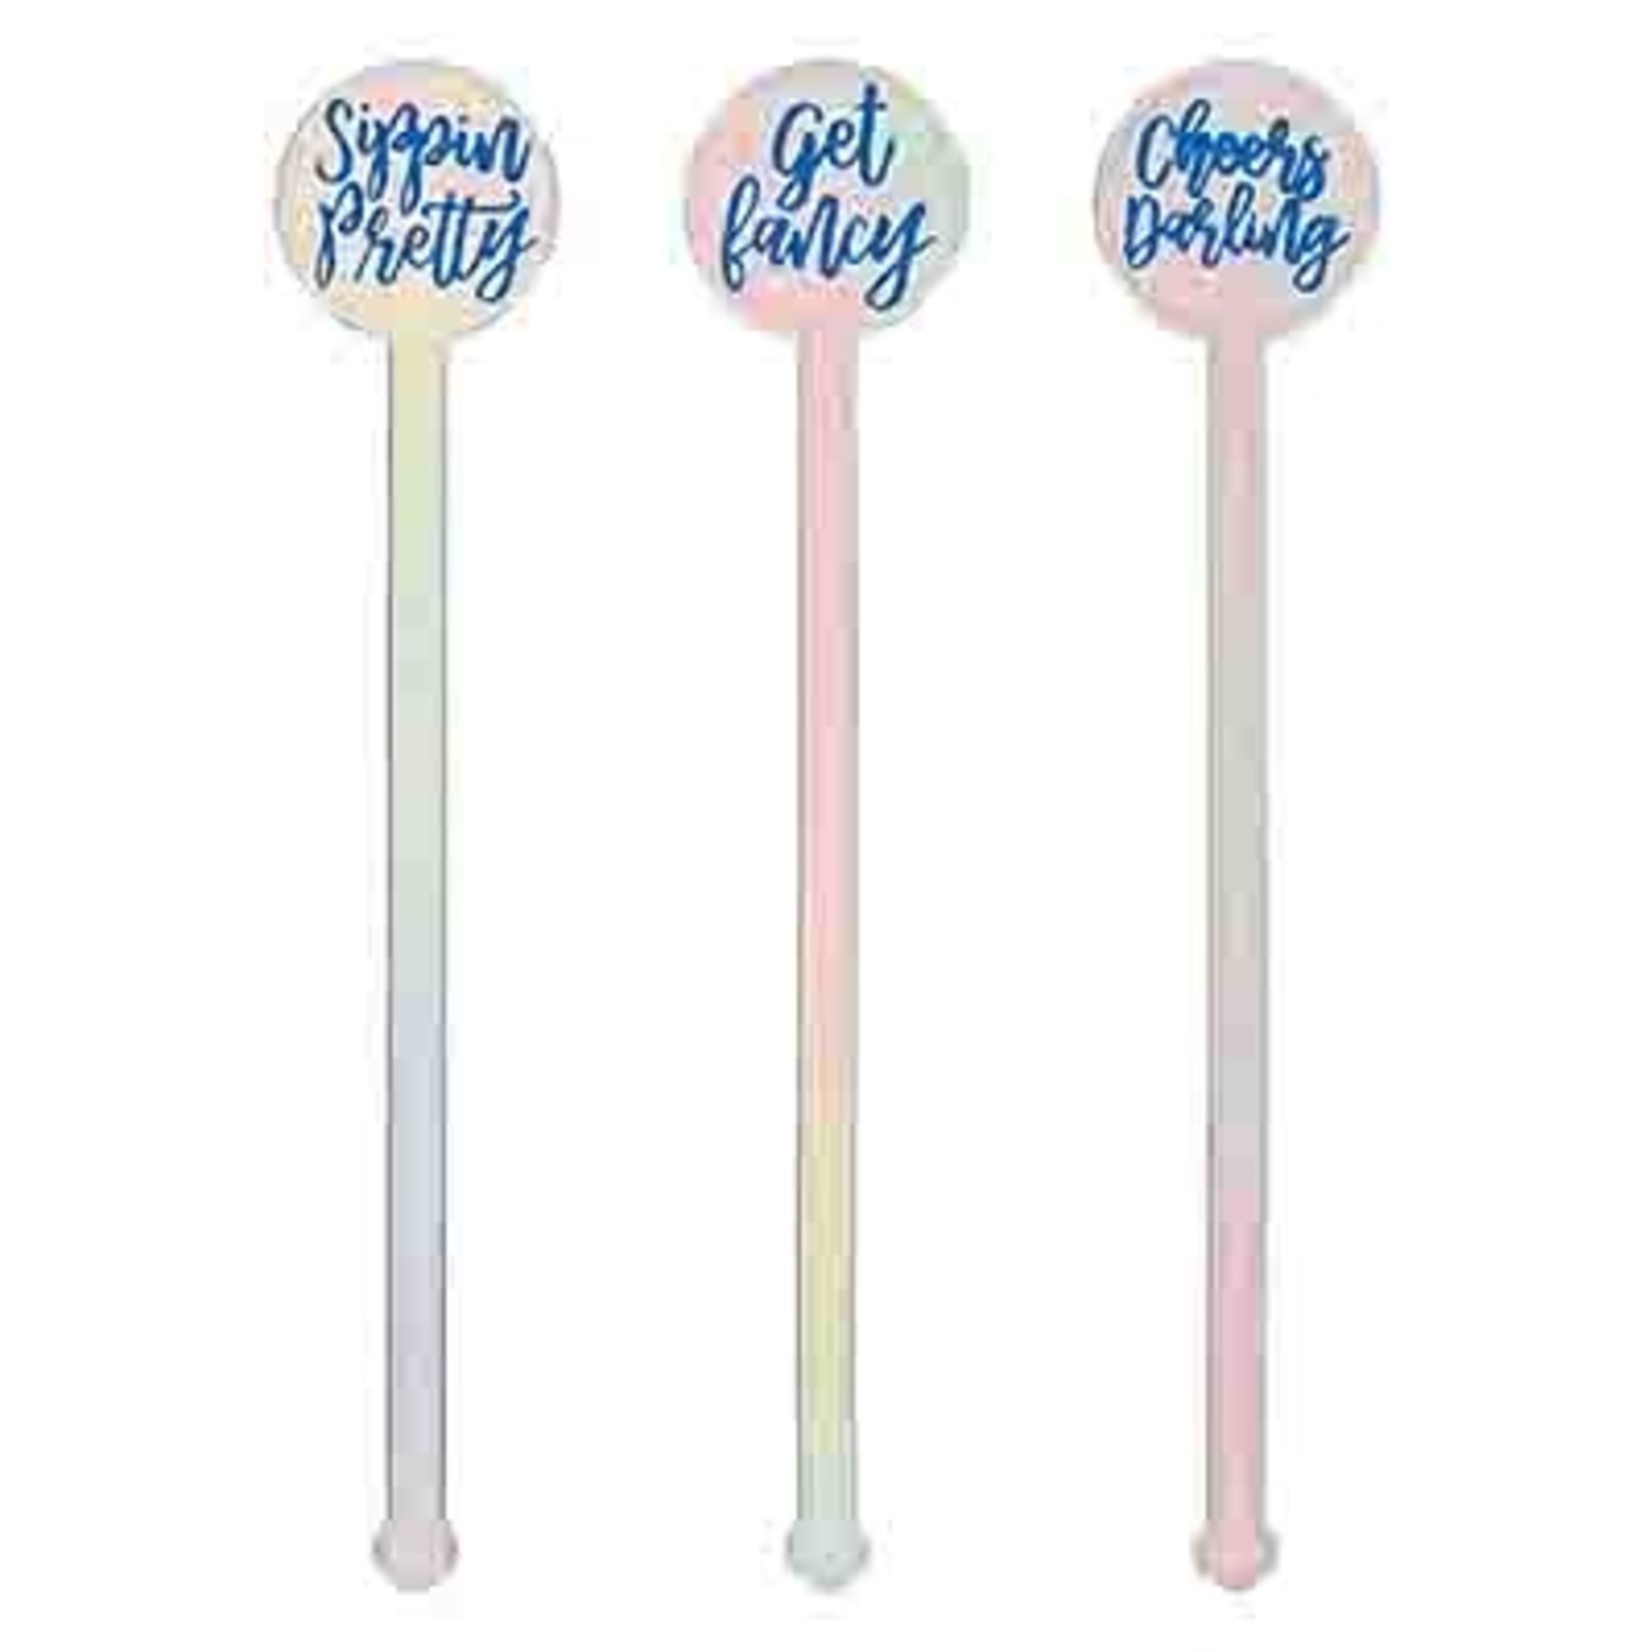 Amscan Iridescent Drink Stirrers w/ Sayings - 12ct.